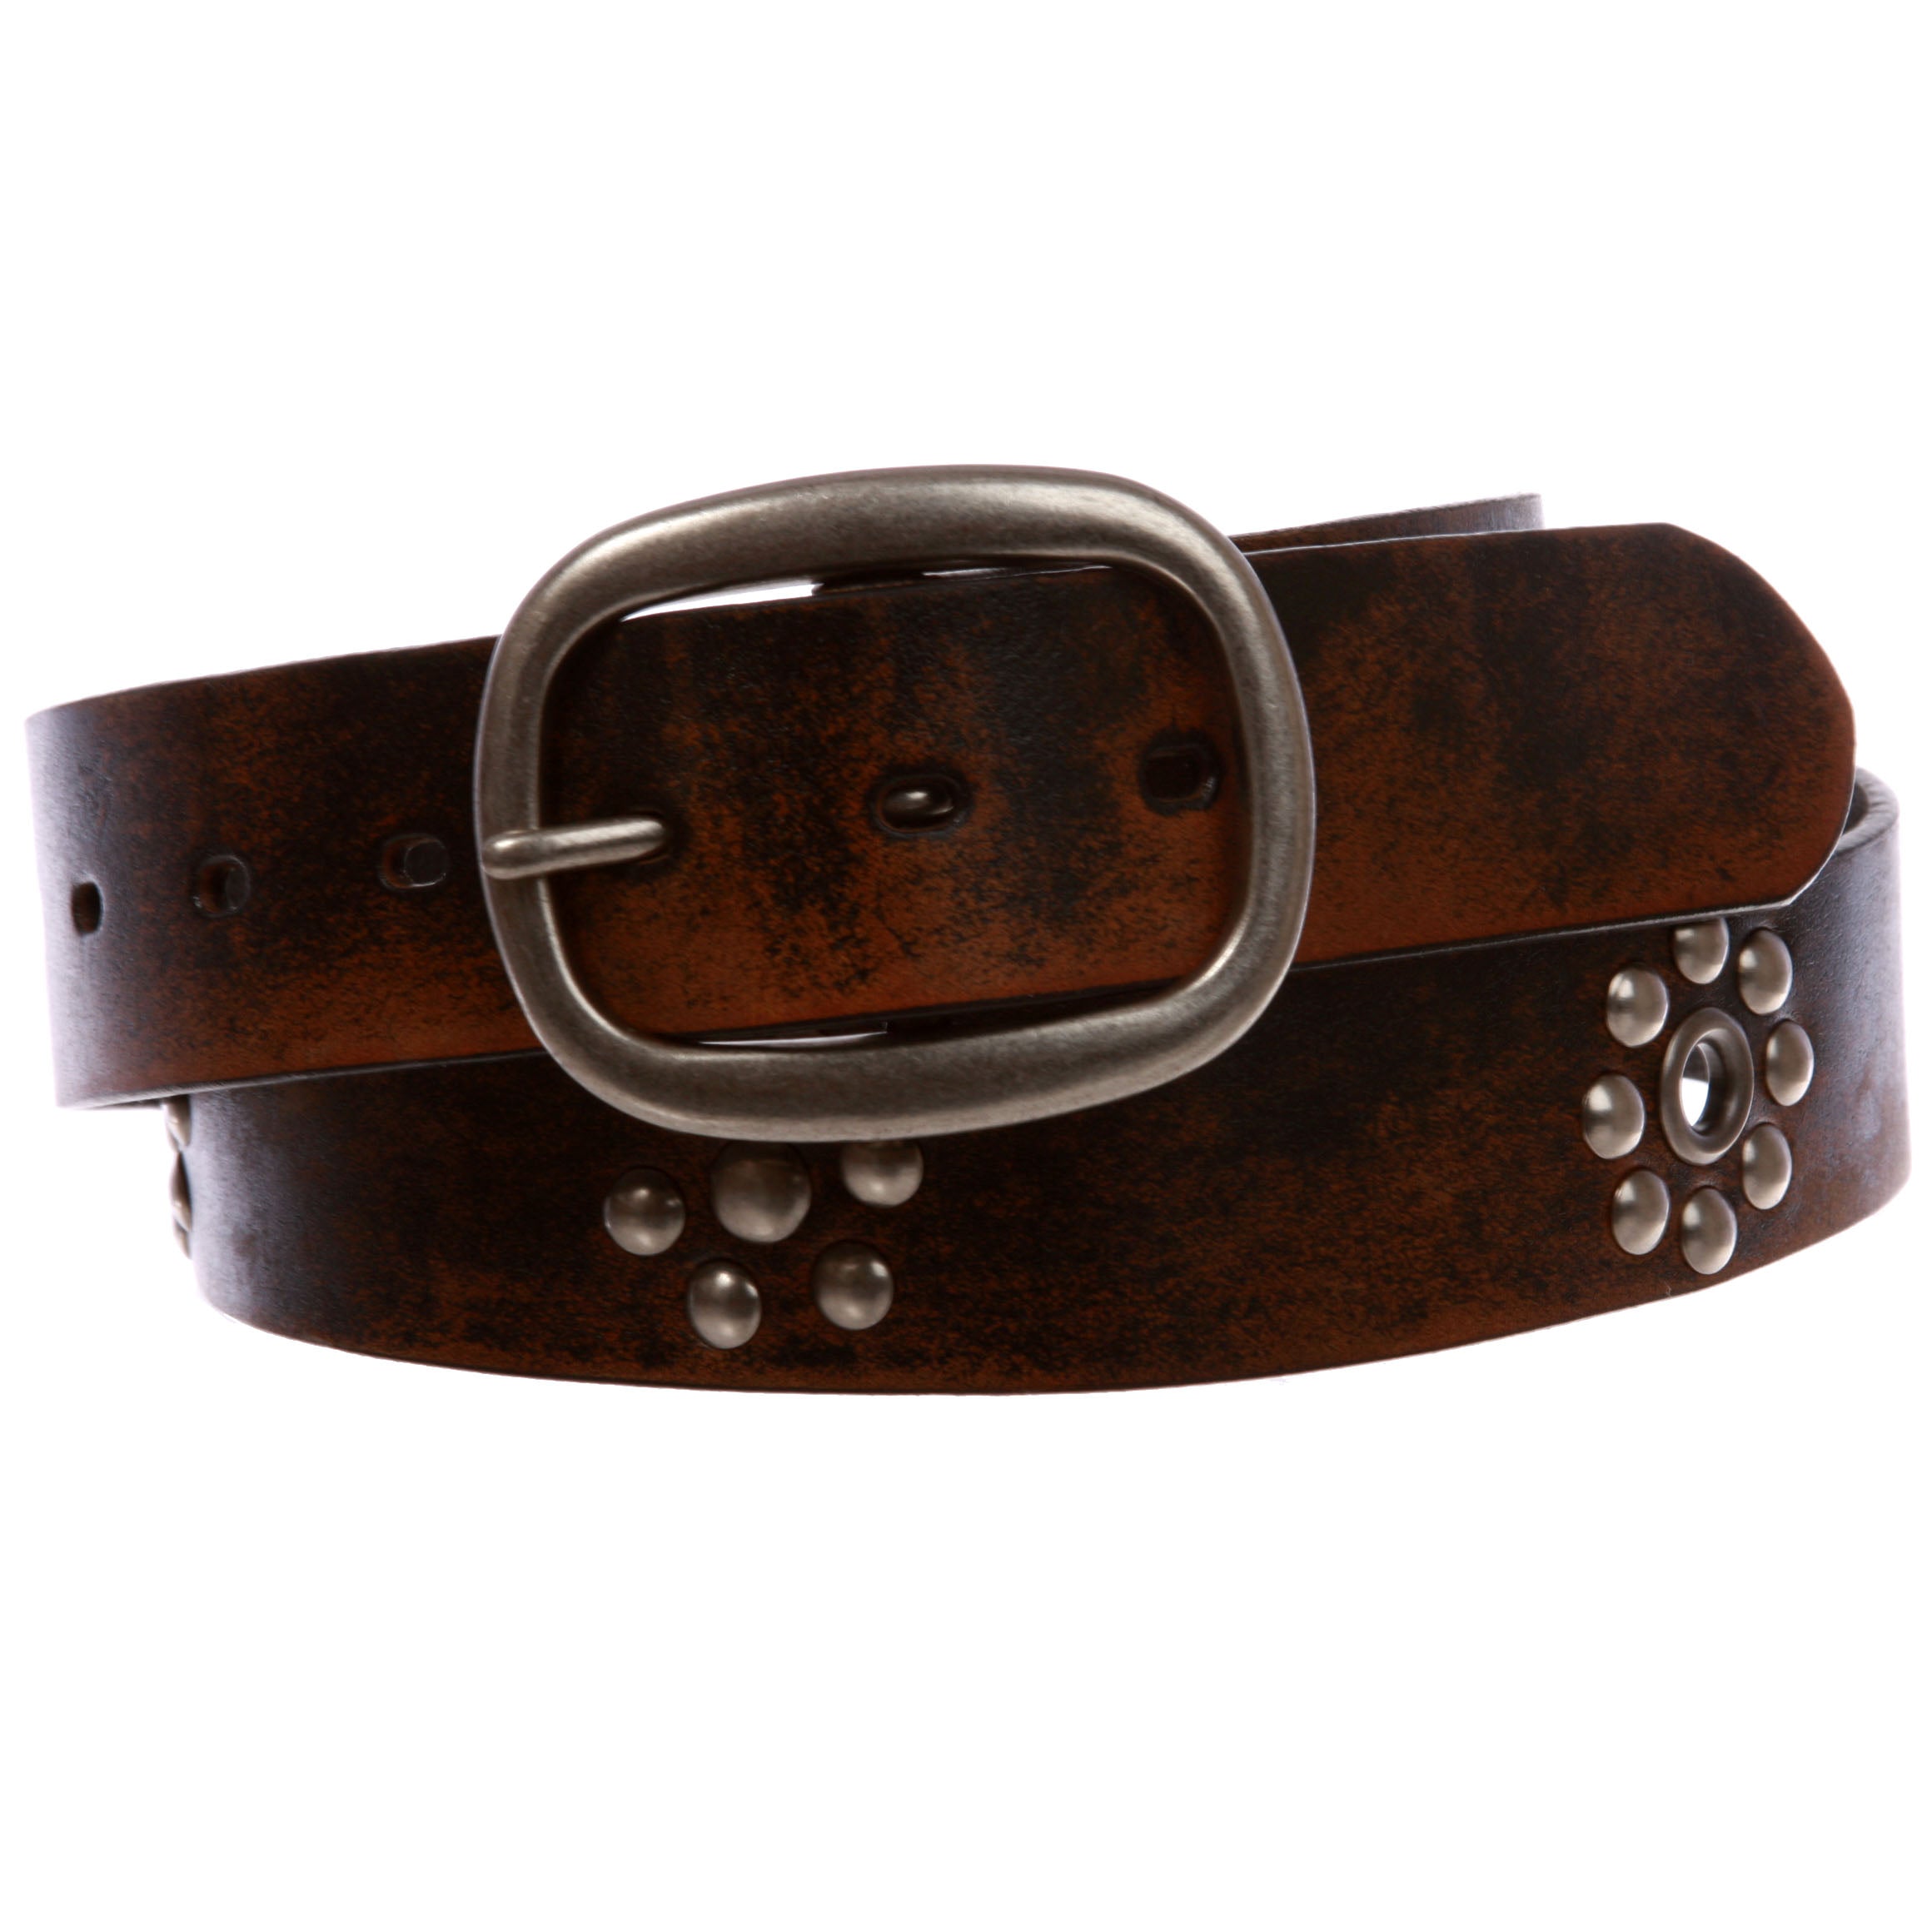 Nail Head Riveted Studs with Grommets Oval Vintage Leather Casual Belt